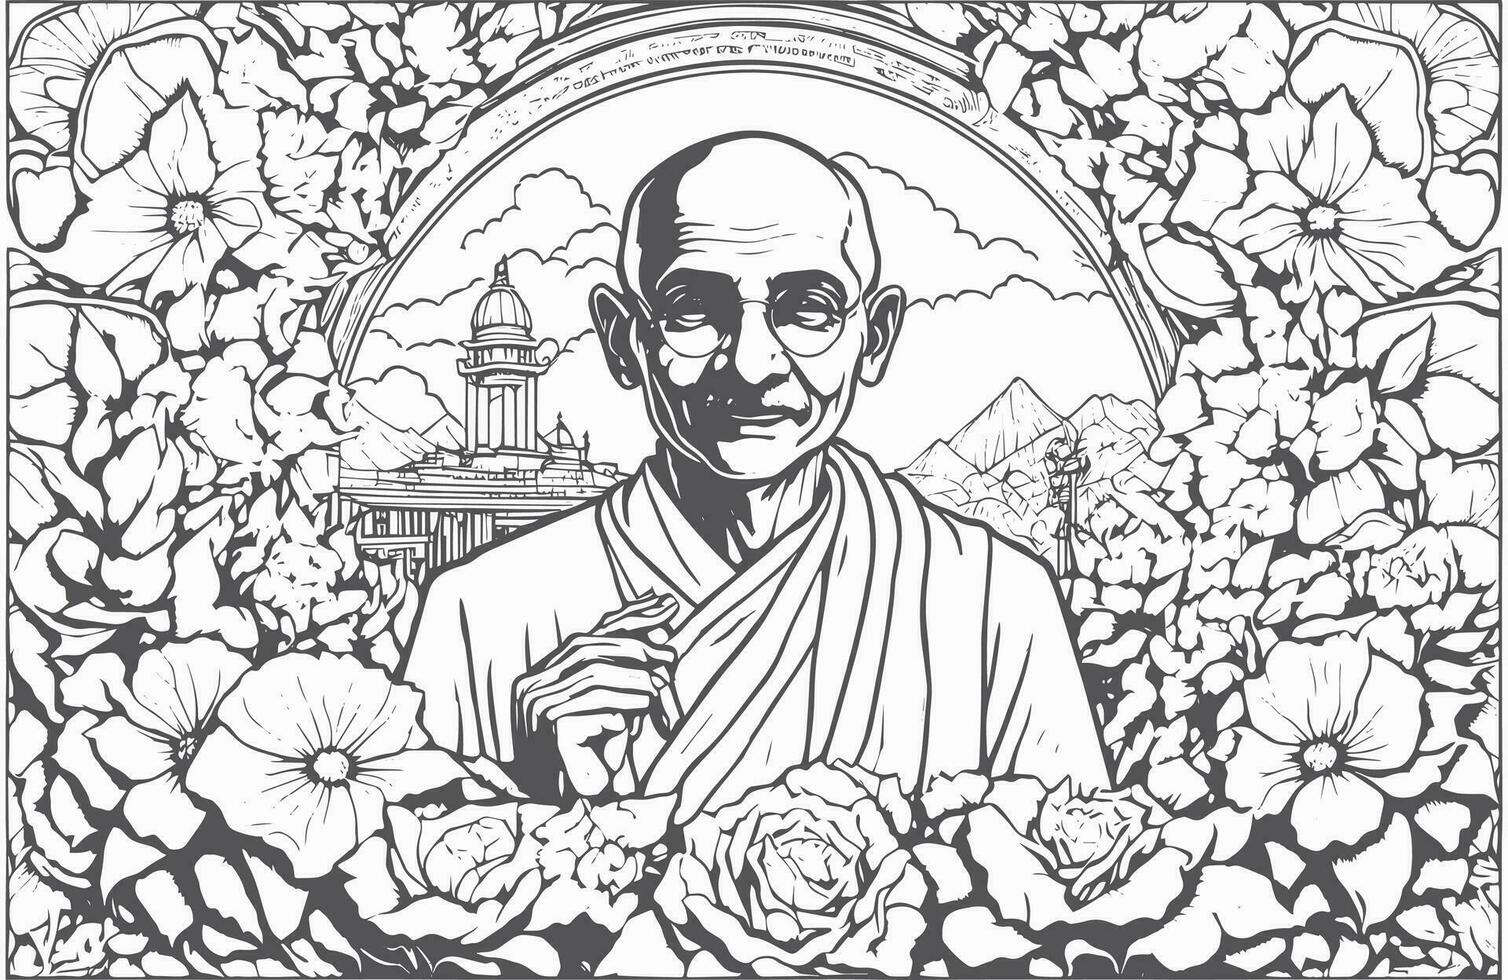 International Day of Non-Violence Gandhi Jayanti. The International Day of Non-Violence is marked on 2 October, the birthday of Mahatma Gandhi, leader of the Indian independence movement. vector